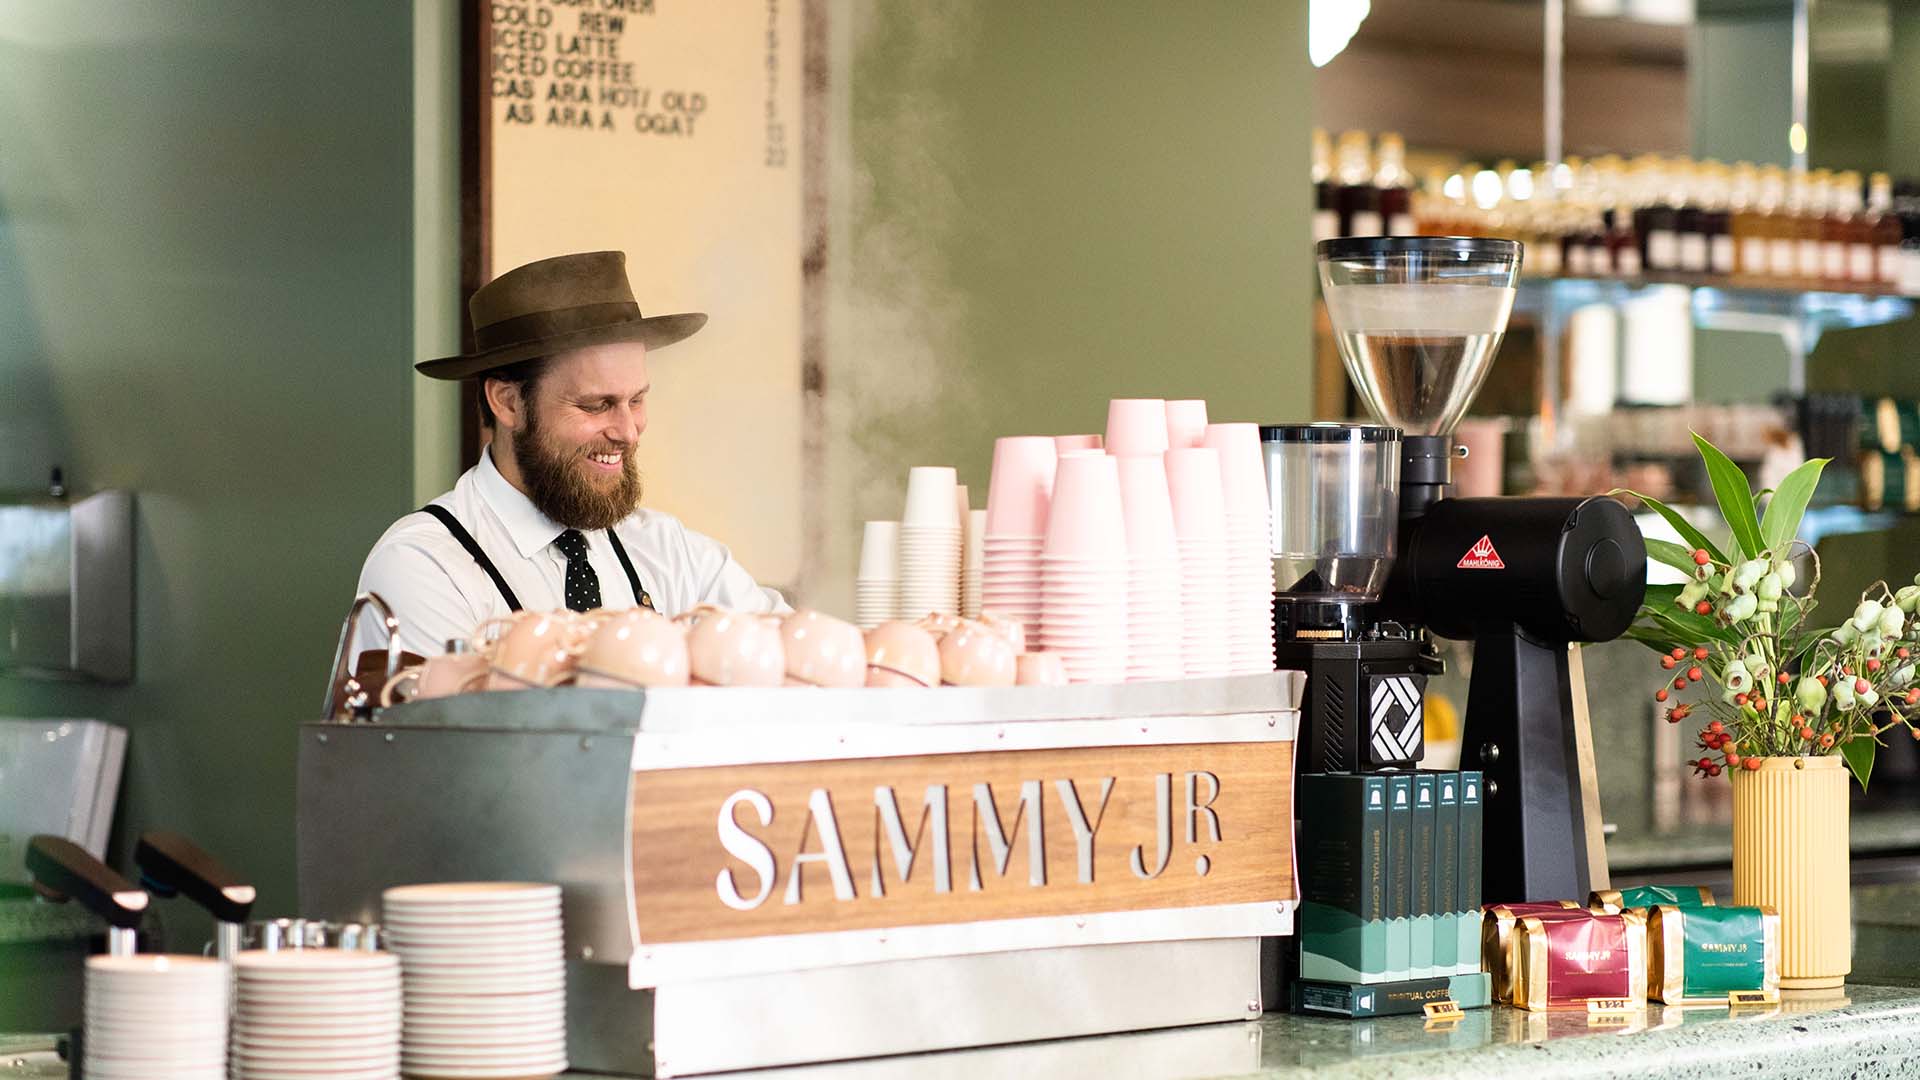 Sammy Junior Is the New CBD Espresso and Cocktail Bar From the Maybe Sammy Team